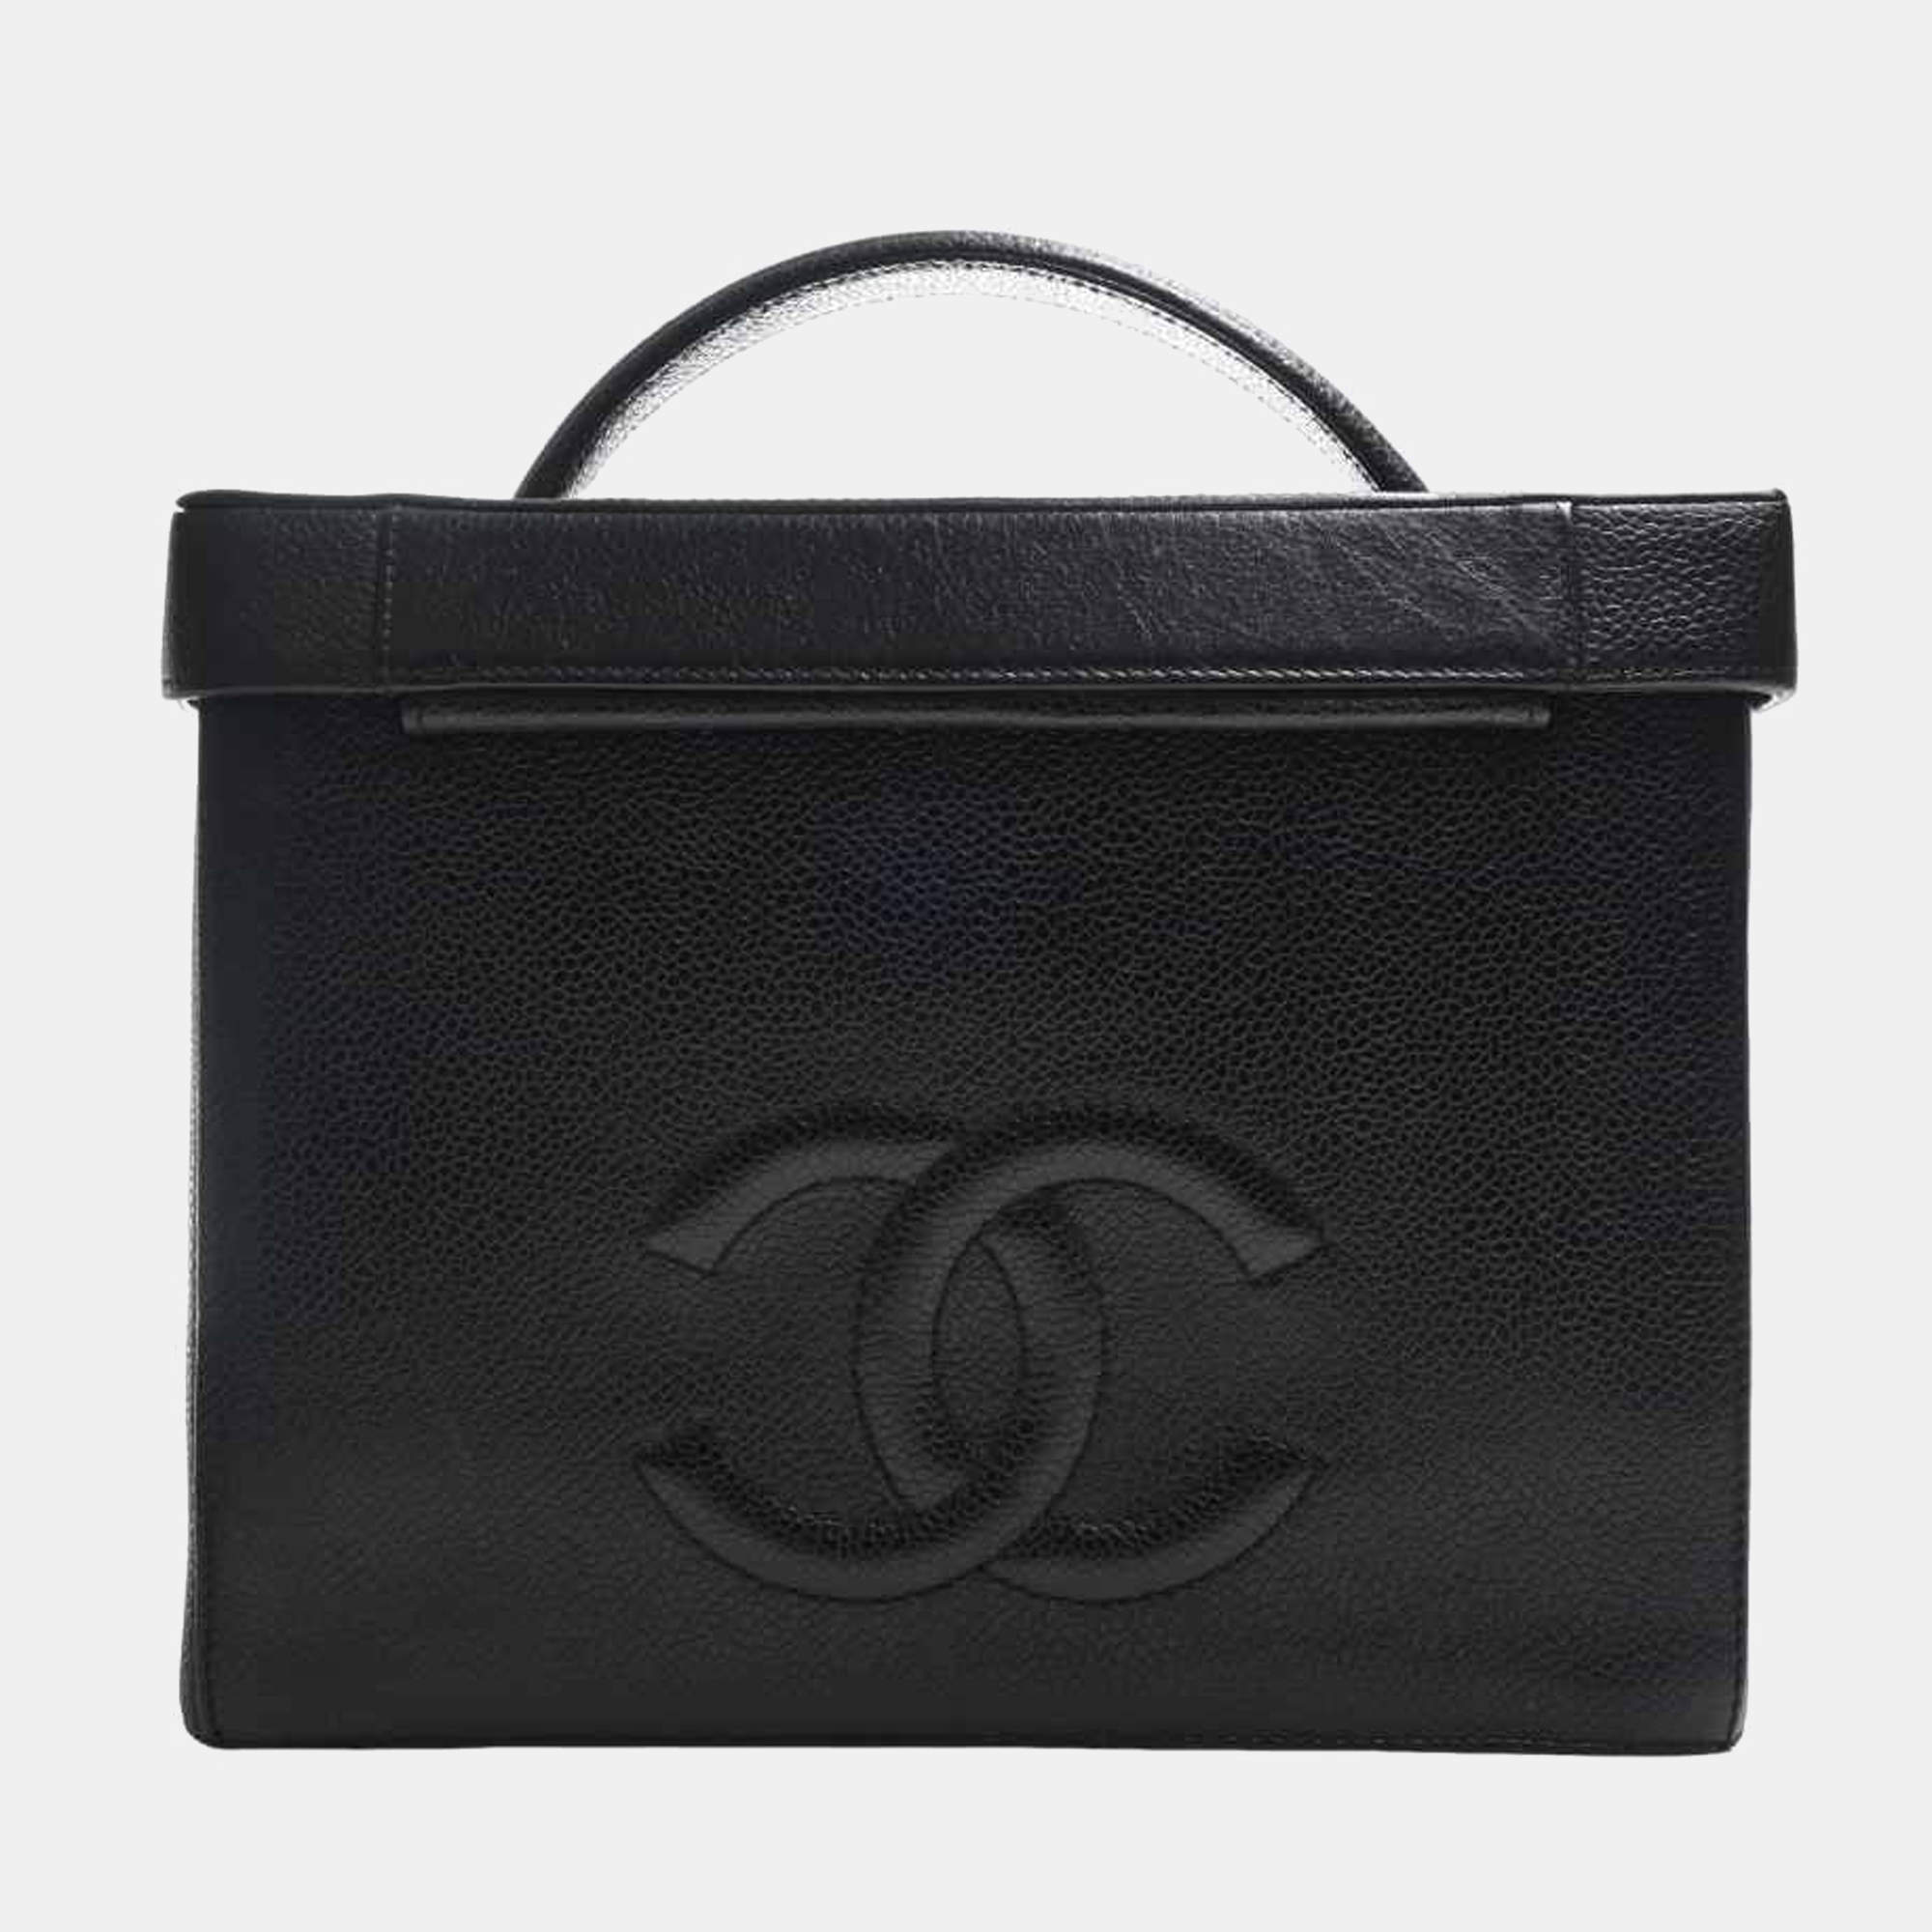 Authentic CHANEL Black Lambskin Timeless Classic Tall Vanity Case Cosmetic  Bag